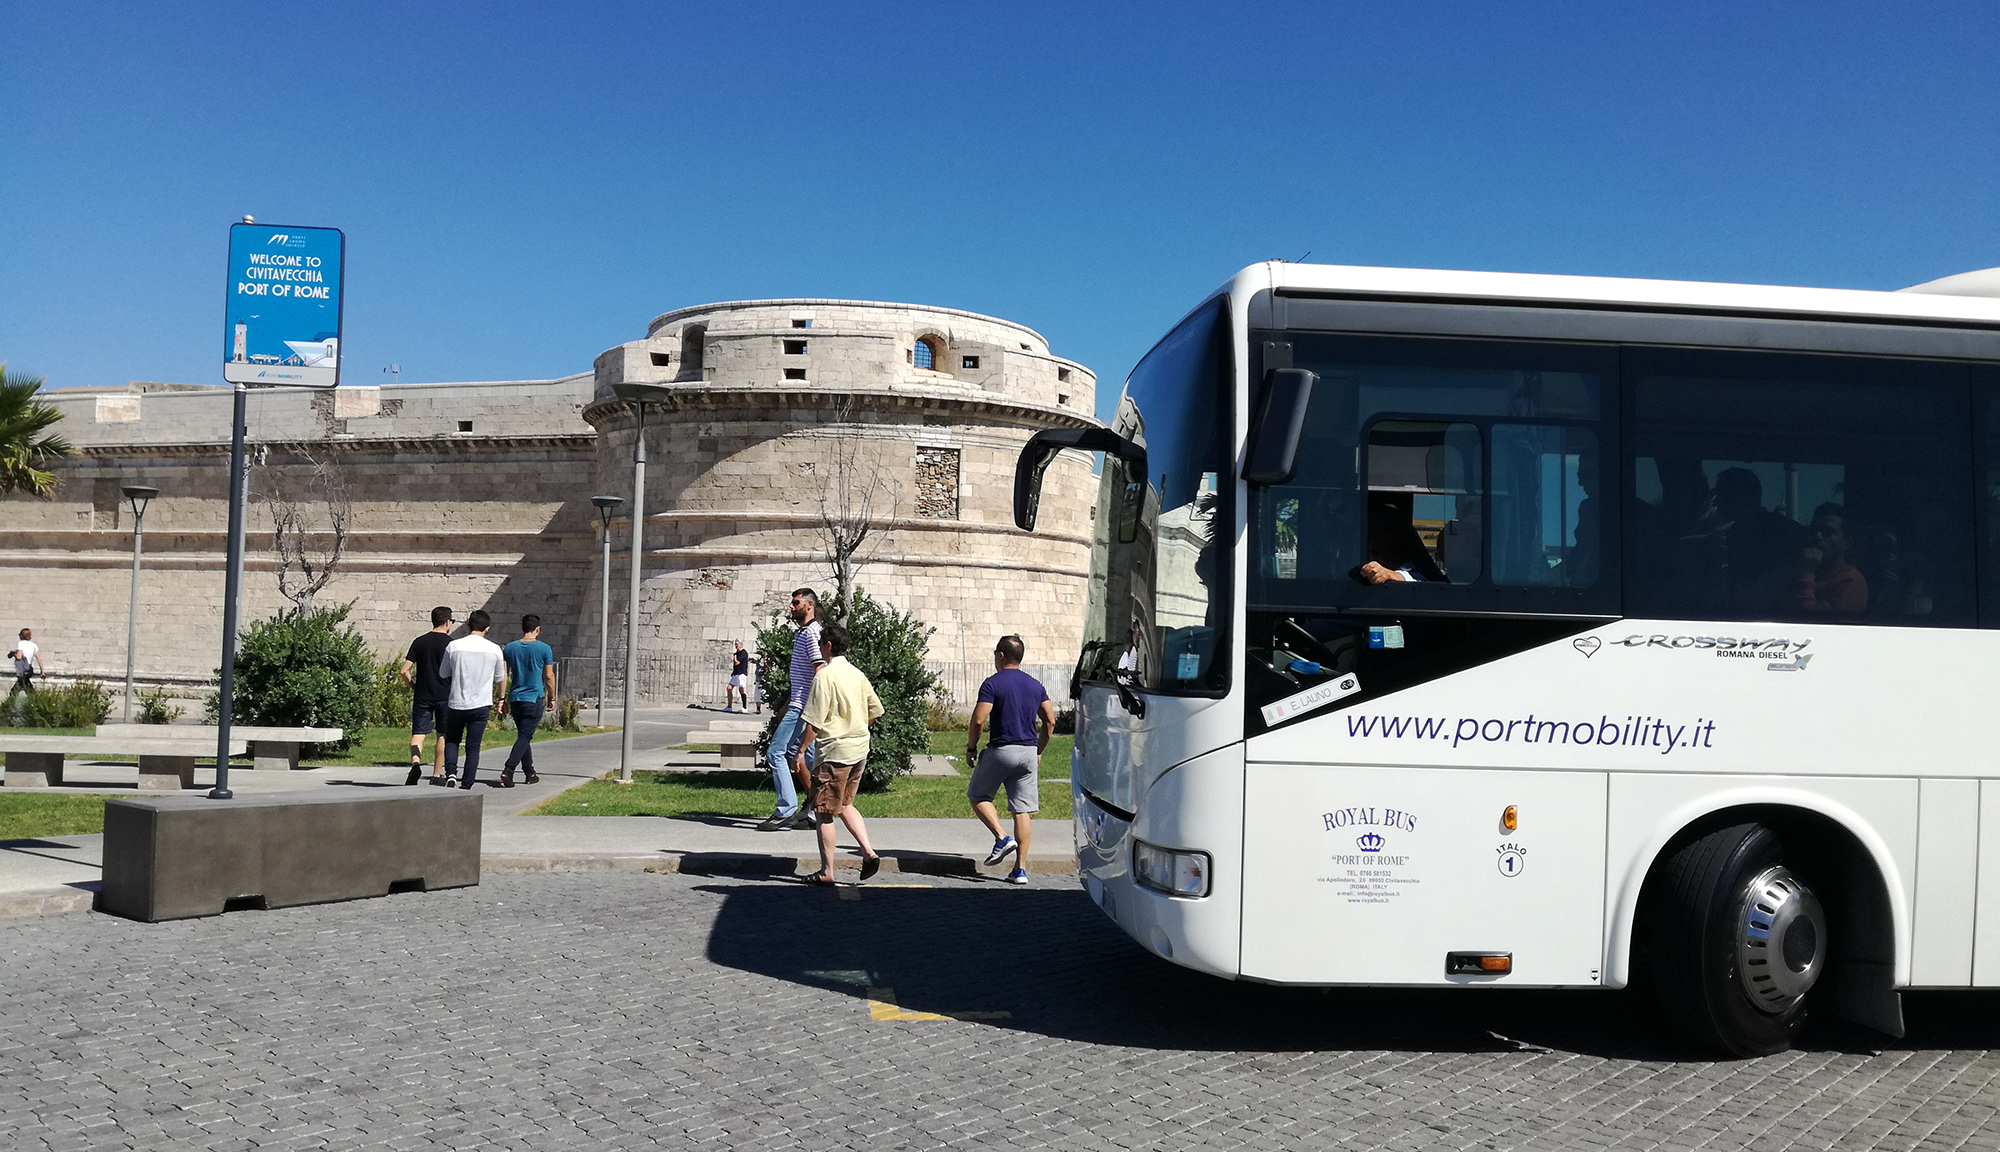 Port of Civitavecchia: the bus stop for cruise passengers is close to the parking lot Bramante, in the historic port a stone's thrown away from the city center